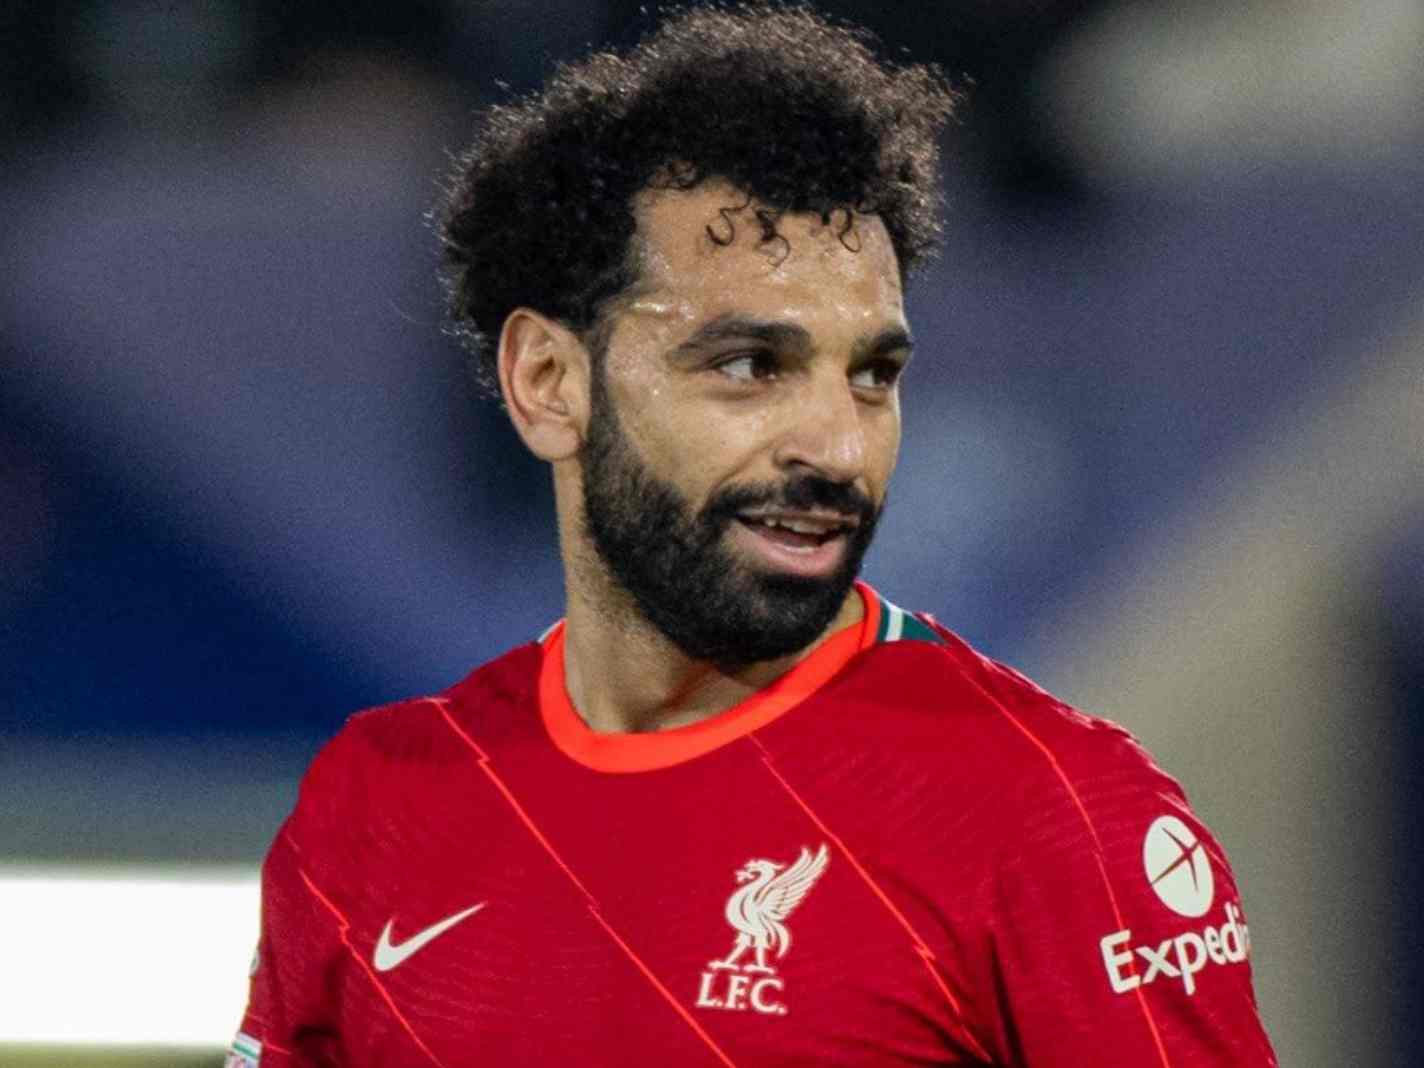 The photo shows Mohamed Salah looking on as Liverpool beat Villarreal in the semi final of the Champions League.